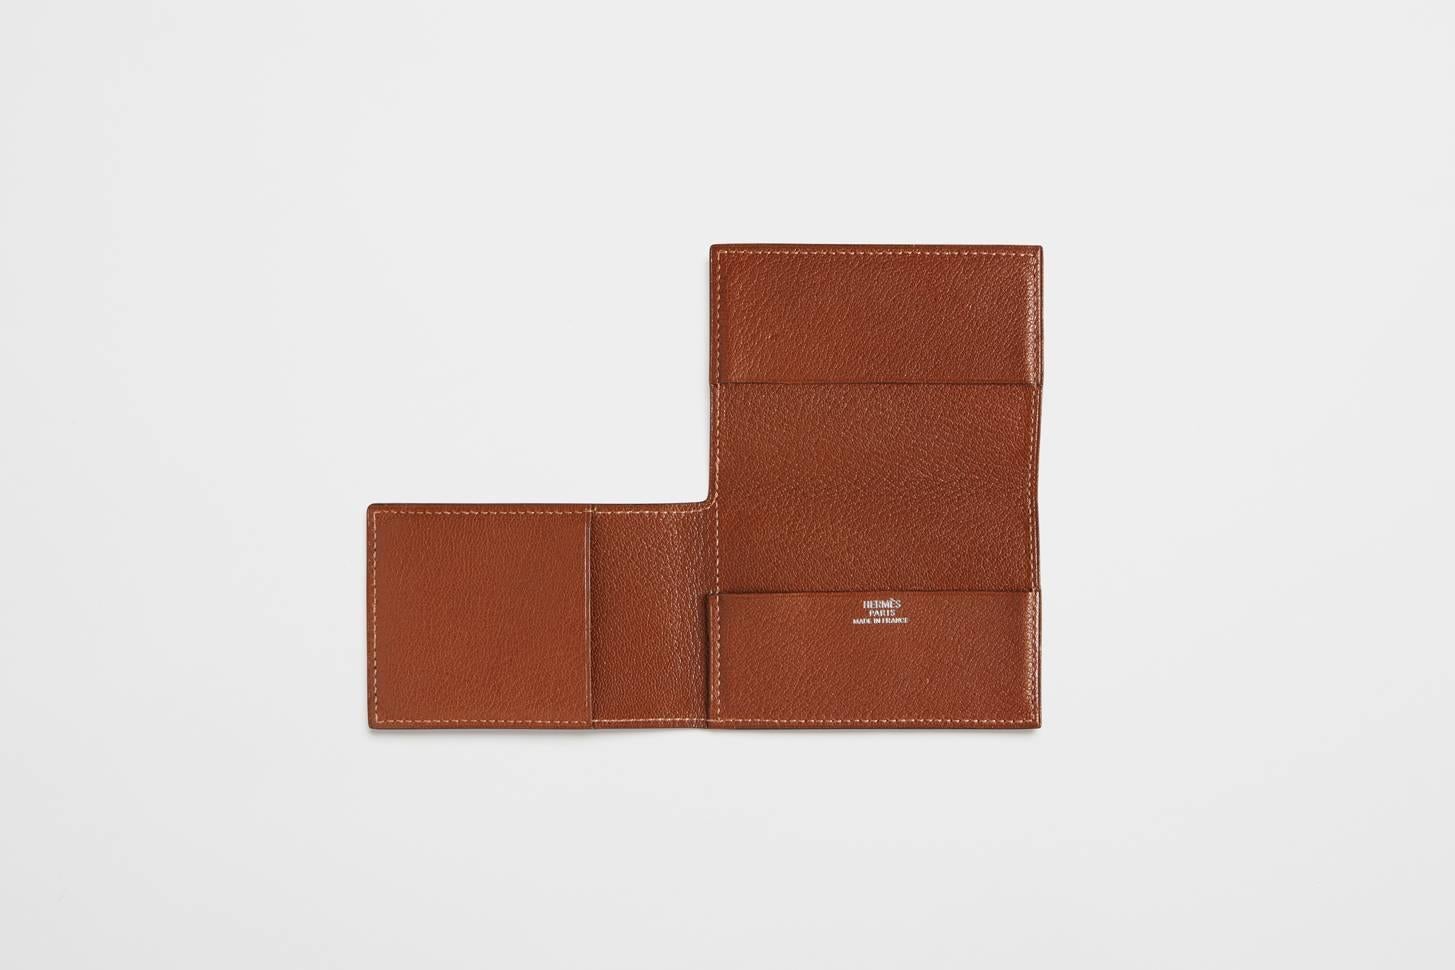 A hand-stitched pig skin card wallet. The piece is a classic opening card wallet. It folds into a practical card case style shape, but opens up into a larger L-shape for carrying additional items. The wallet opens up to have spaces two spaces for